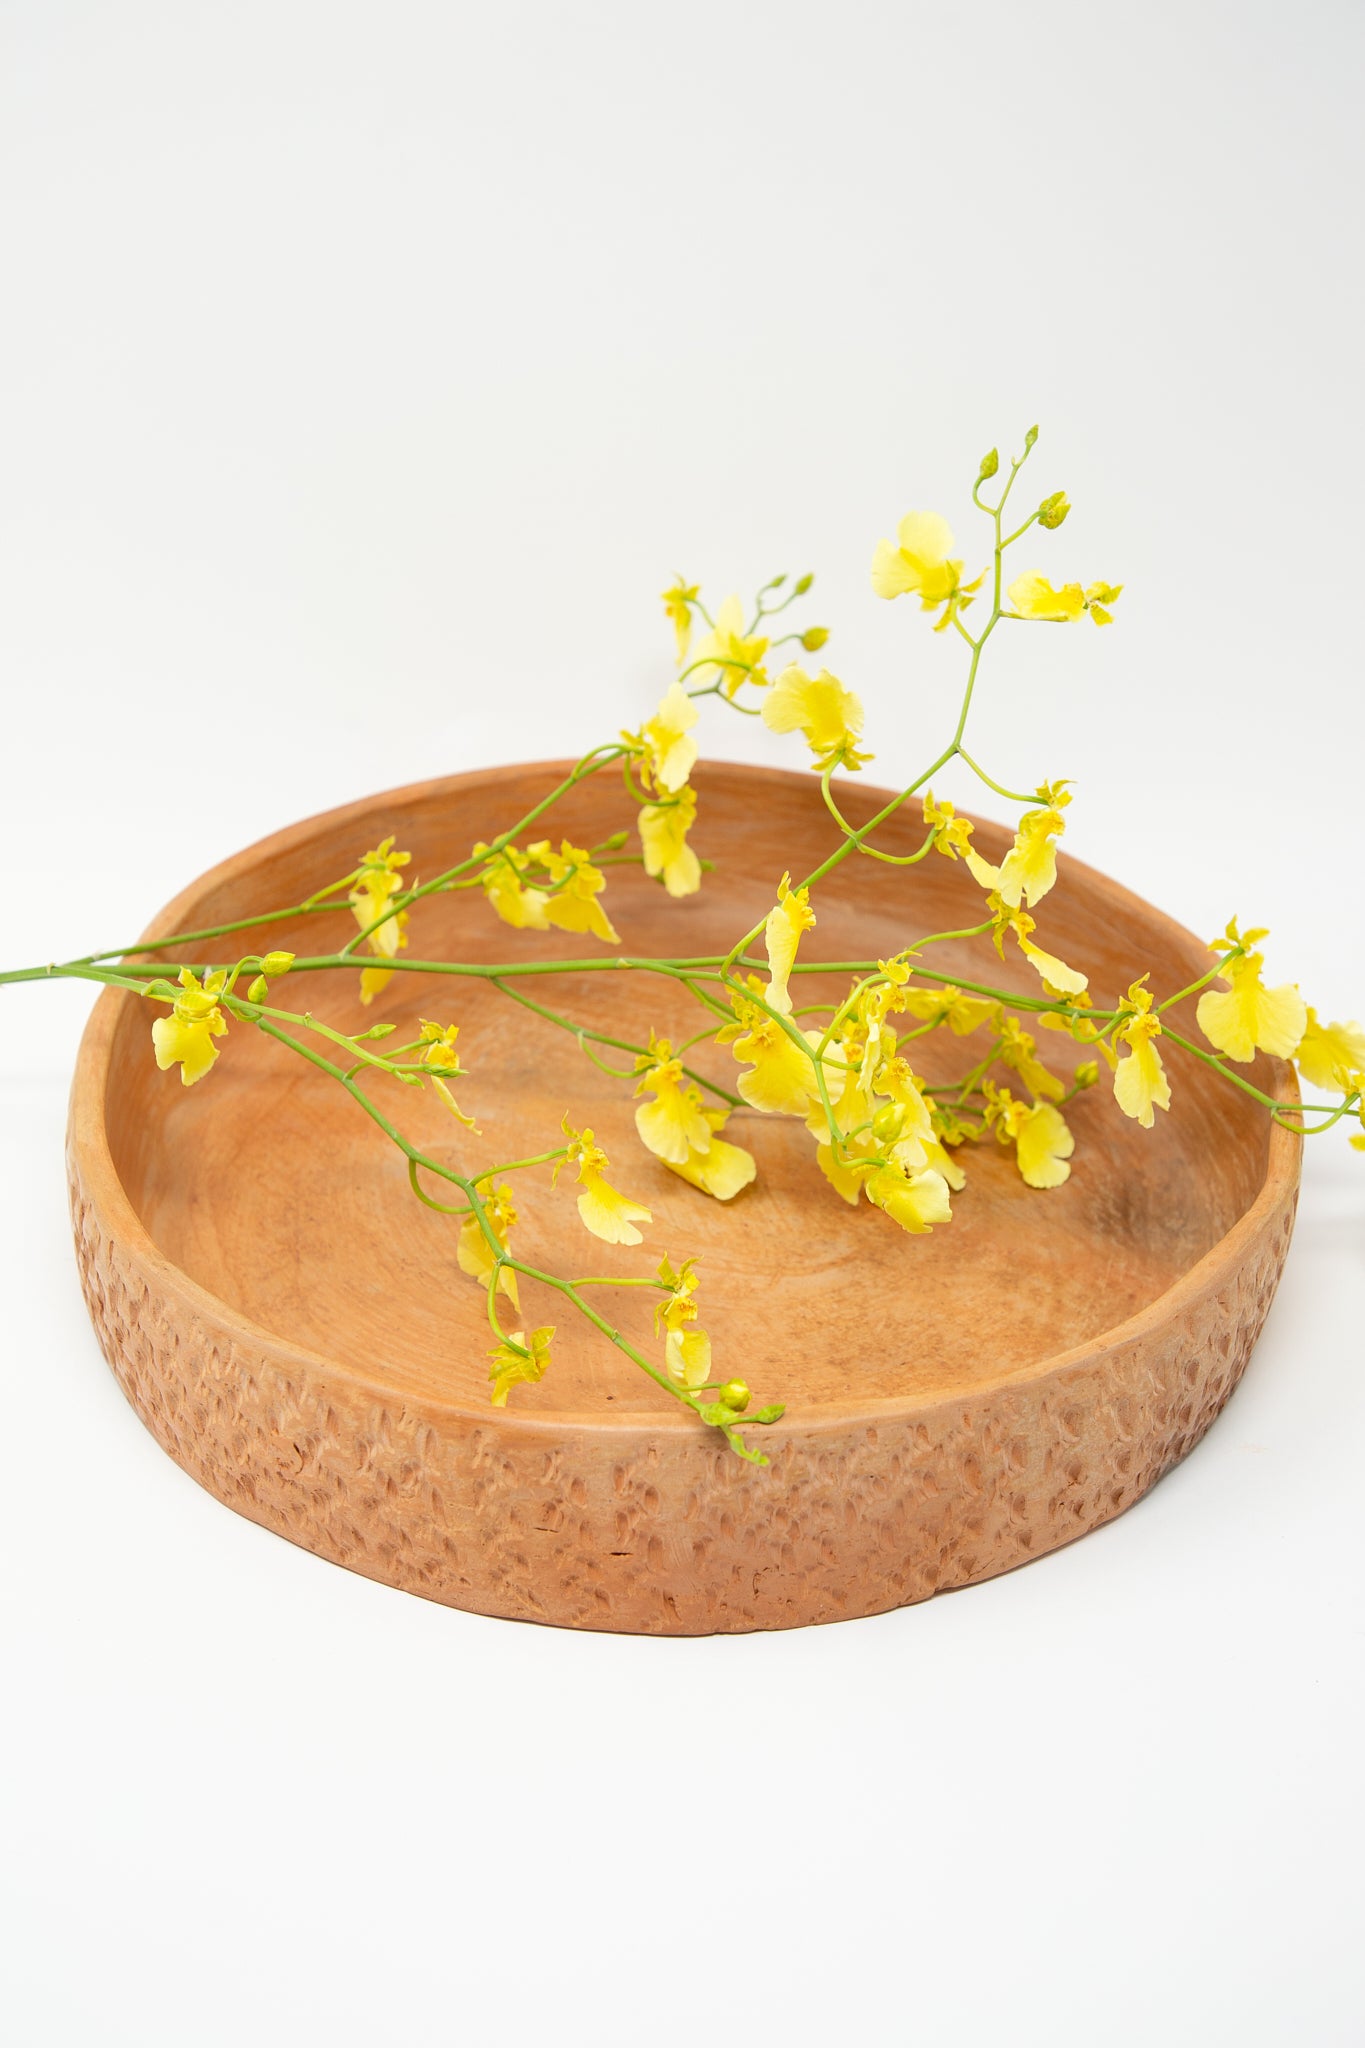 A rustic Julia Frutero Platter in Red Clay, adorned with yellow flowers, handcrafted by Cerámicas Plaza Bolivar.